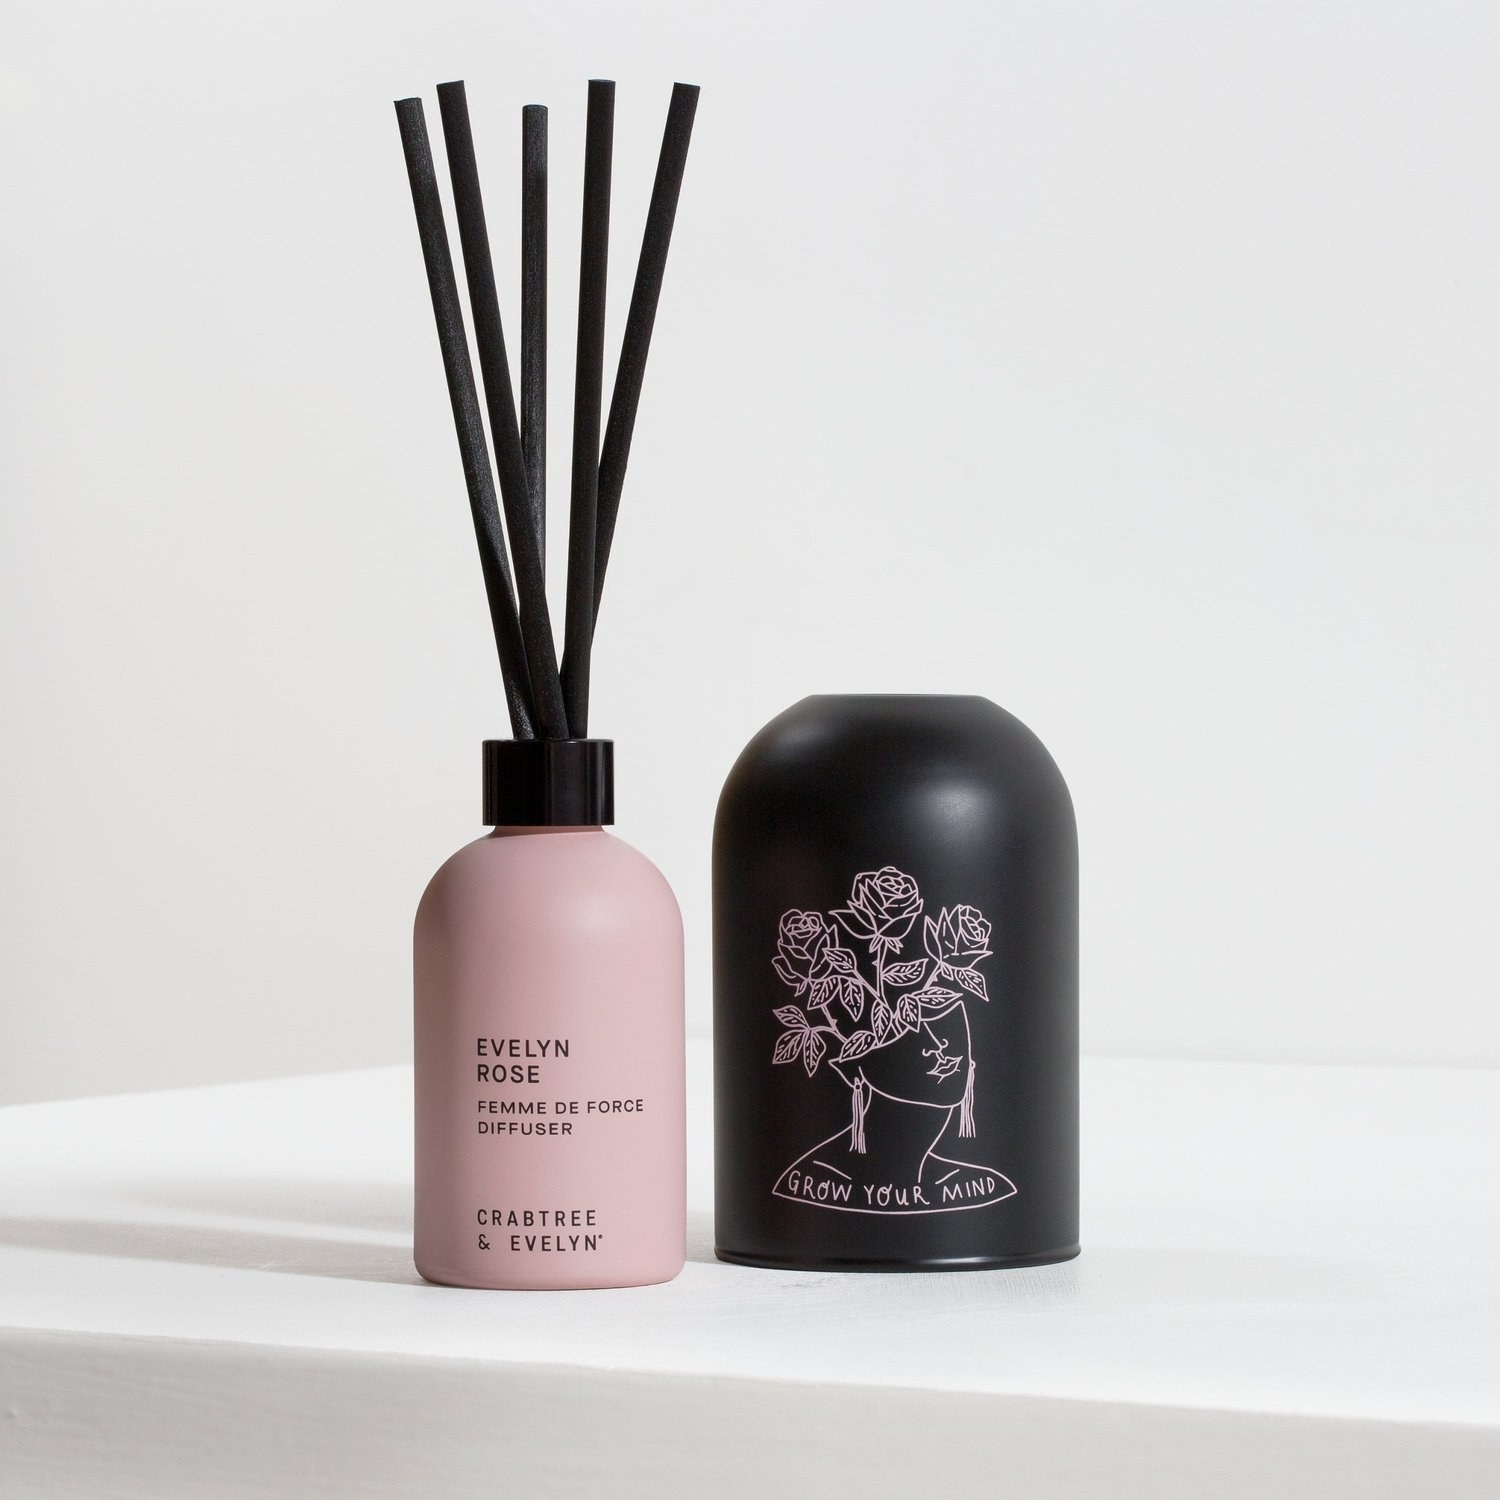 the pink diffuser with black cup next to it